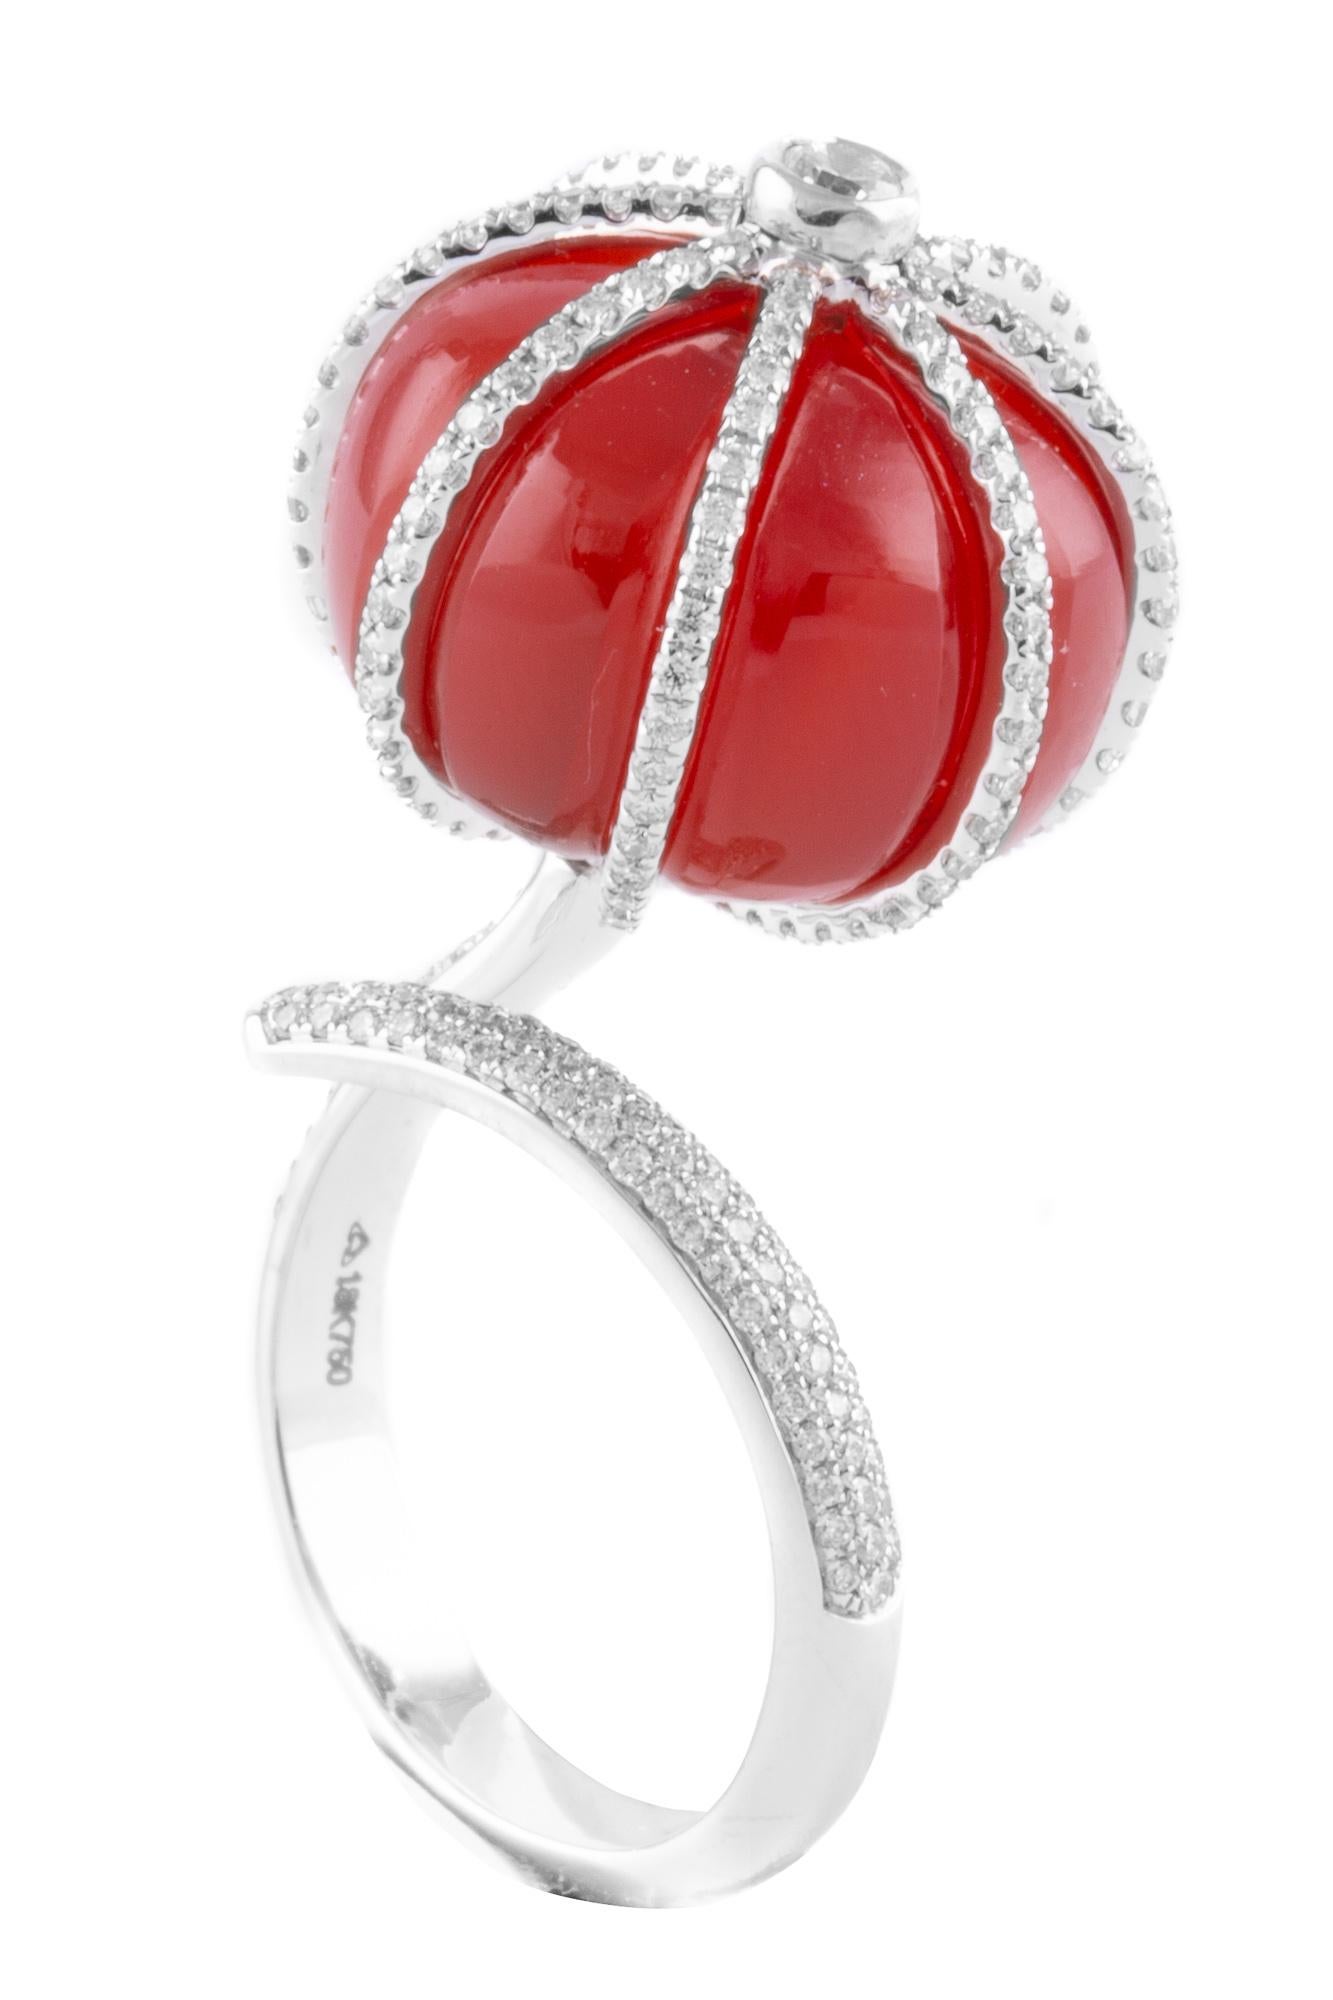 Atelo’s Boule Collection is defined voluminous shapes and diverse colours, resulting in bold yet charming pieces.

Red carnelian is finely wrapped with brilliant-cut diamonds in this cocktail ring in 18 karat white gold.

A truly distinct design and